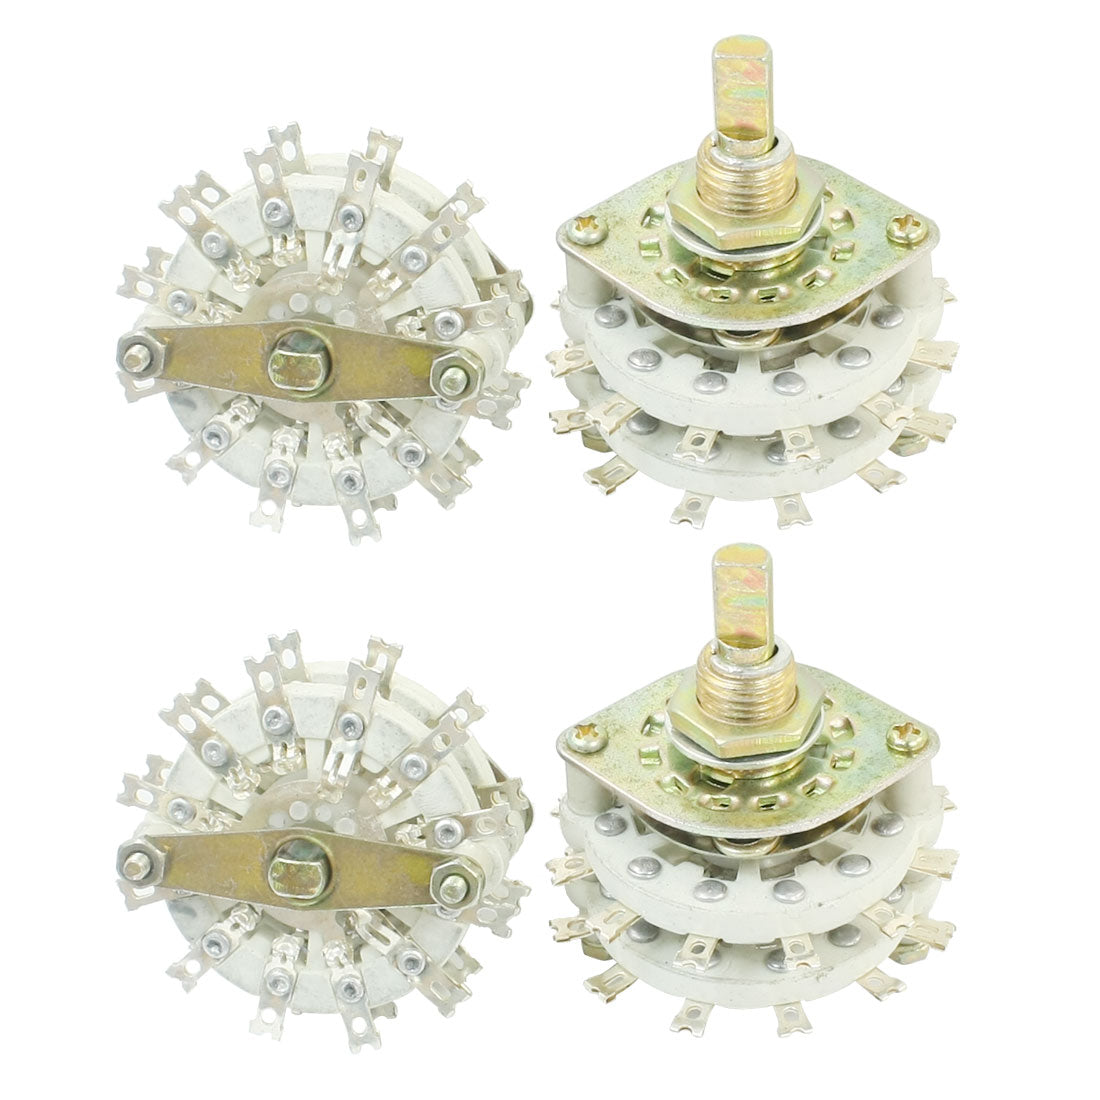 uxcell Uxcell 4PCS KCZ2*11 10mm Mounting Hole Dia 2P11T 2 Pole 11 Position Double Decks Band Channael Rotary Switch